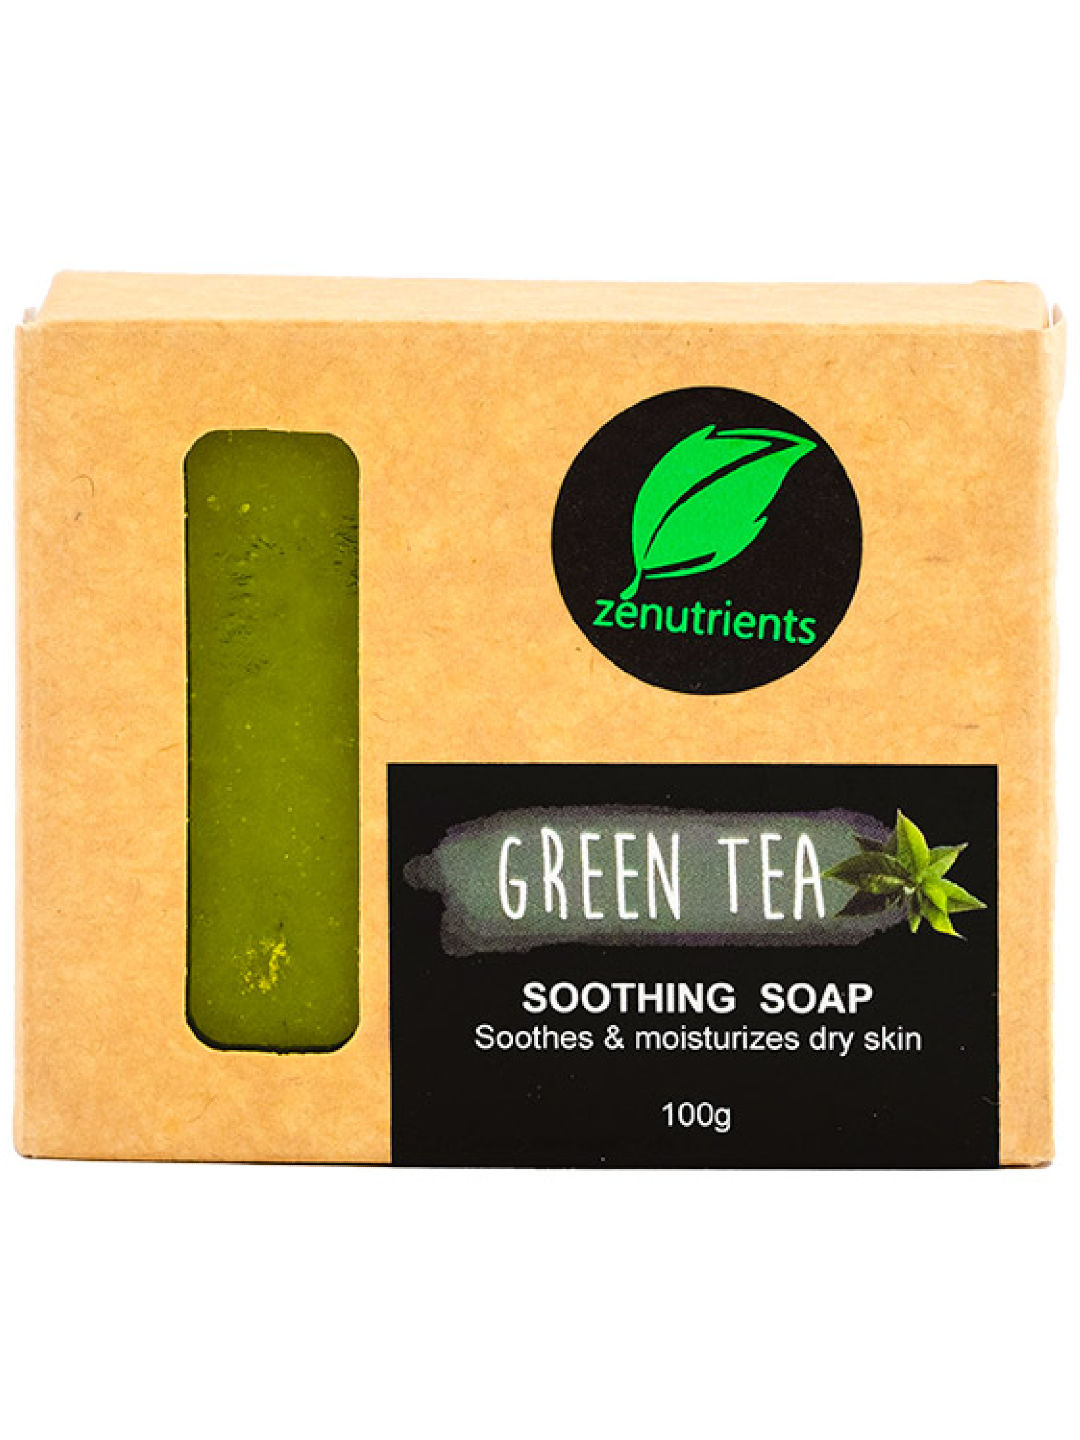 Zenutrients Green Tea Soothing Soap (100g) (No Color- Image 1)